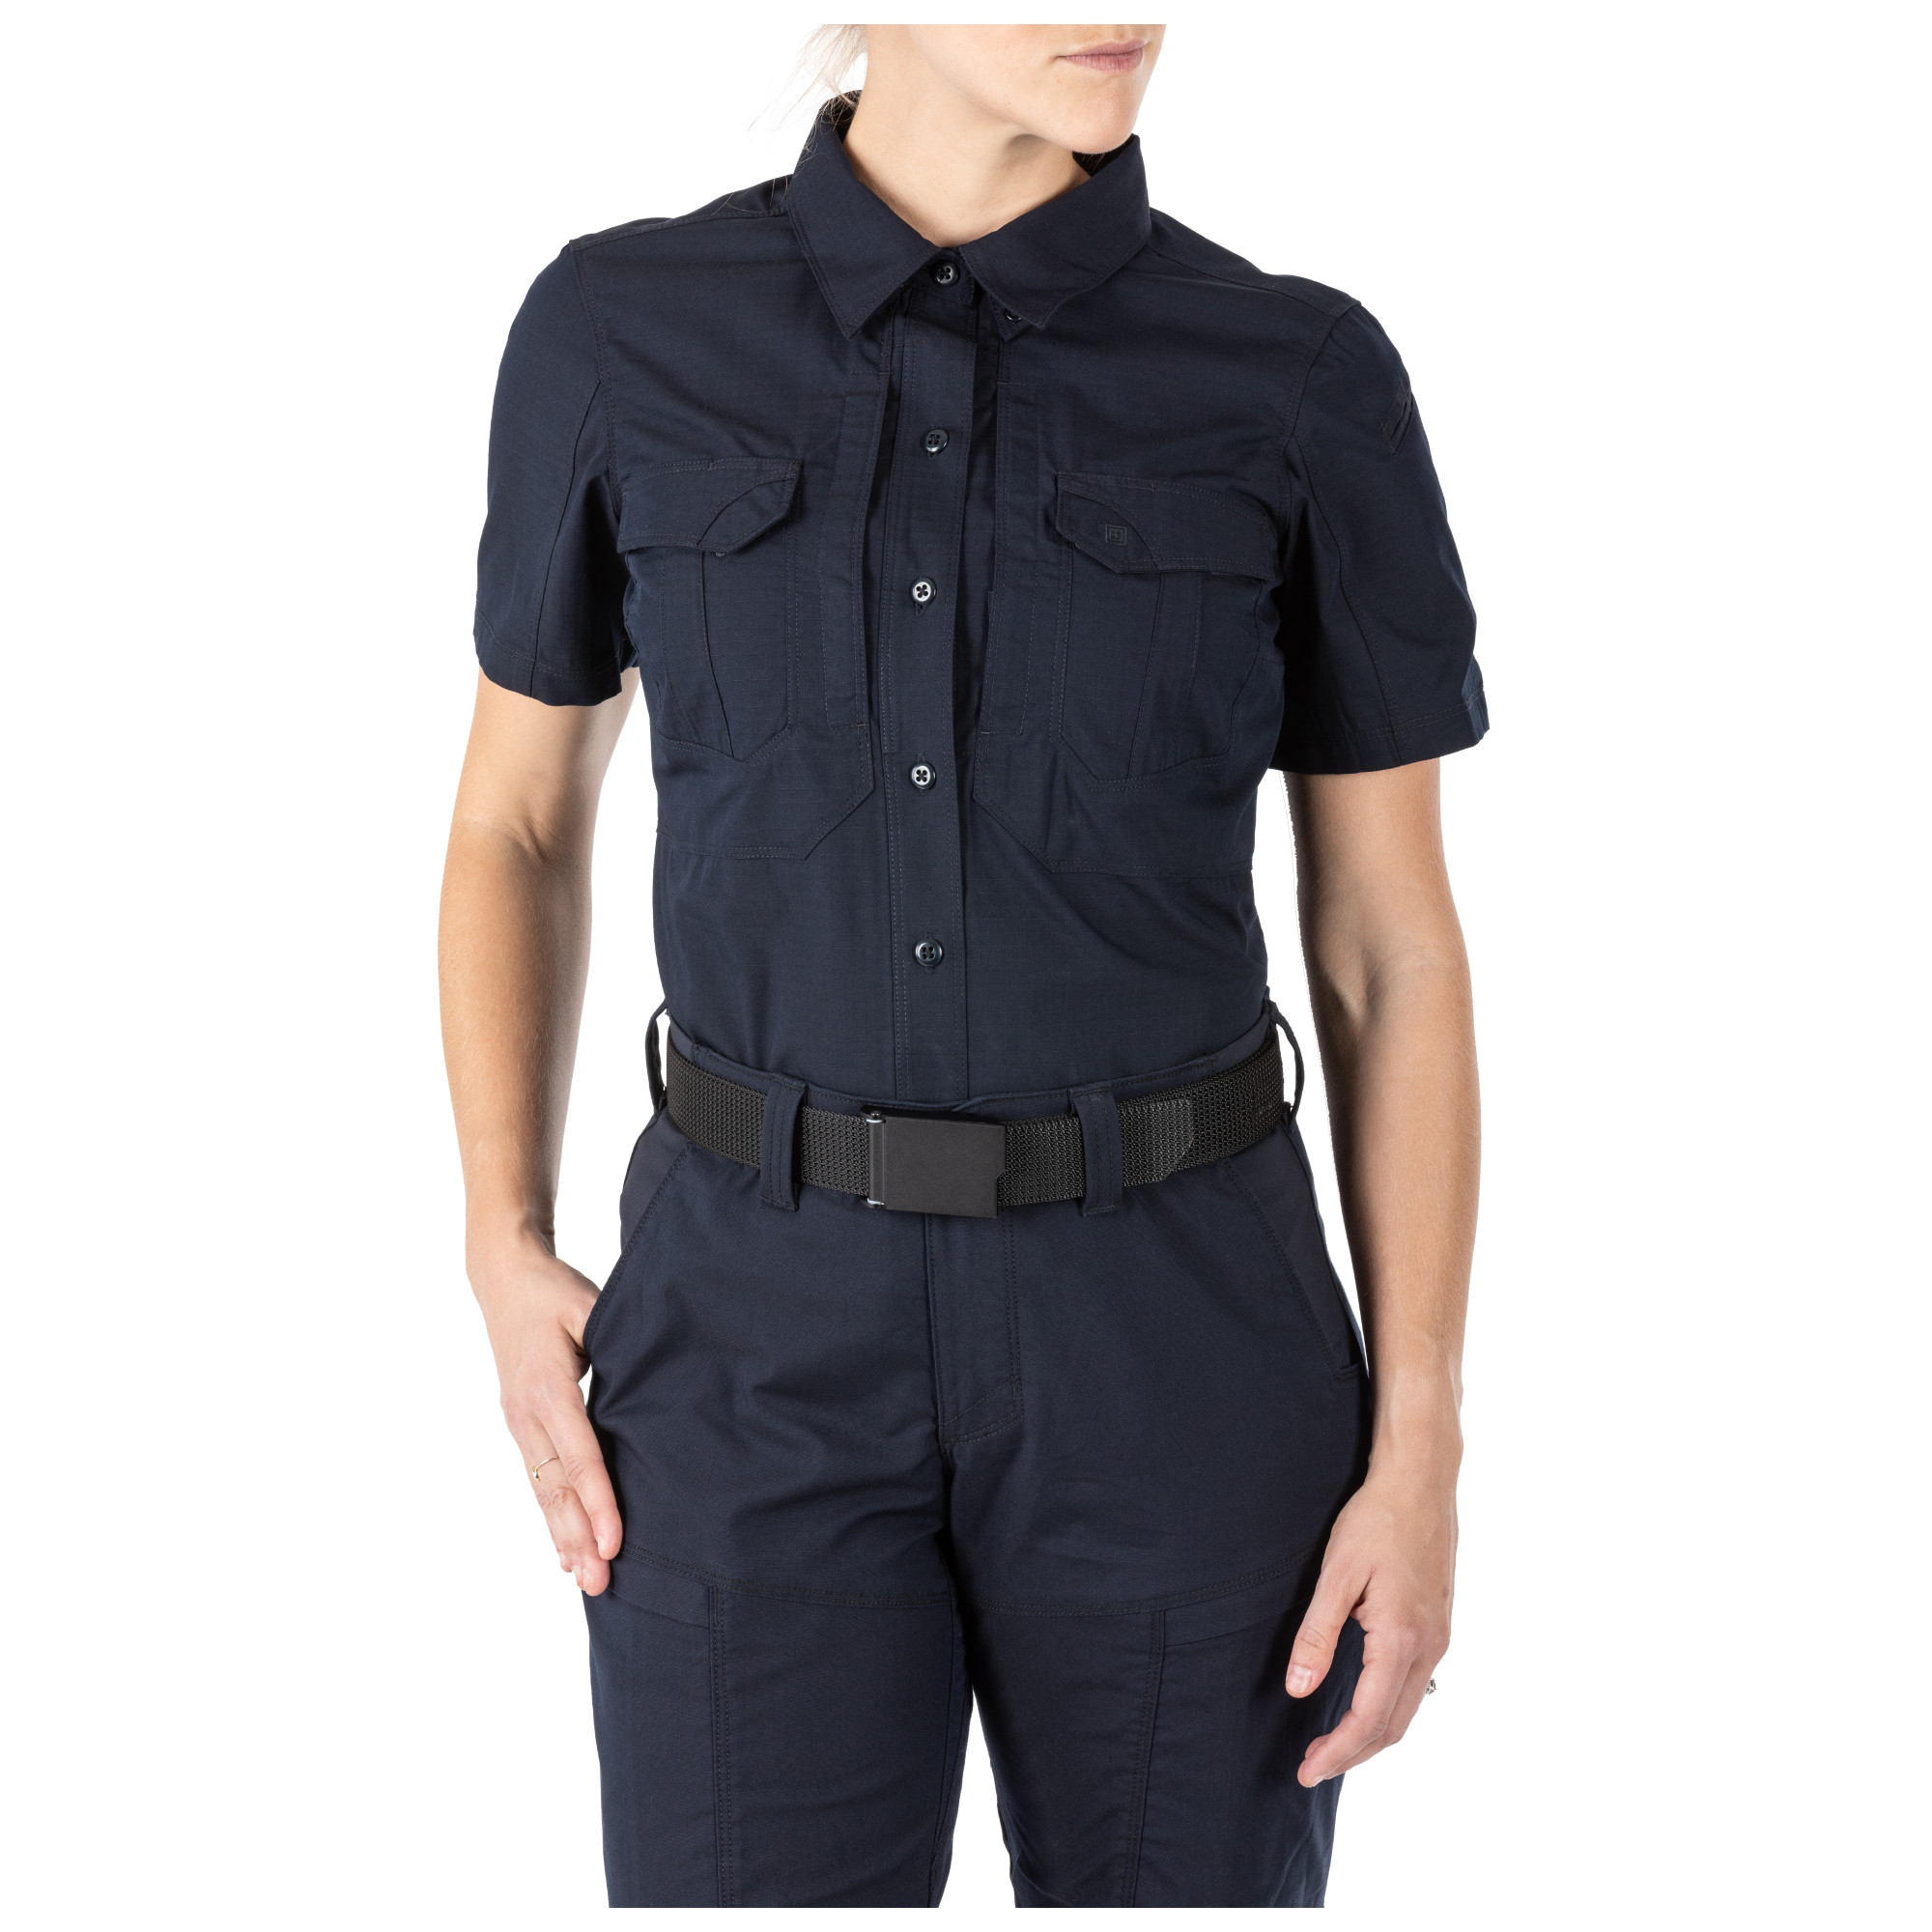 5.11 Strykeâ ¢ Short Sleeve Shirt From 5.11 Tactical-